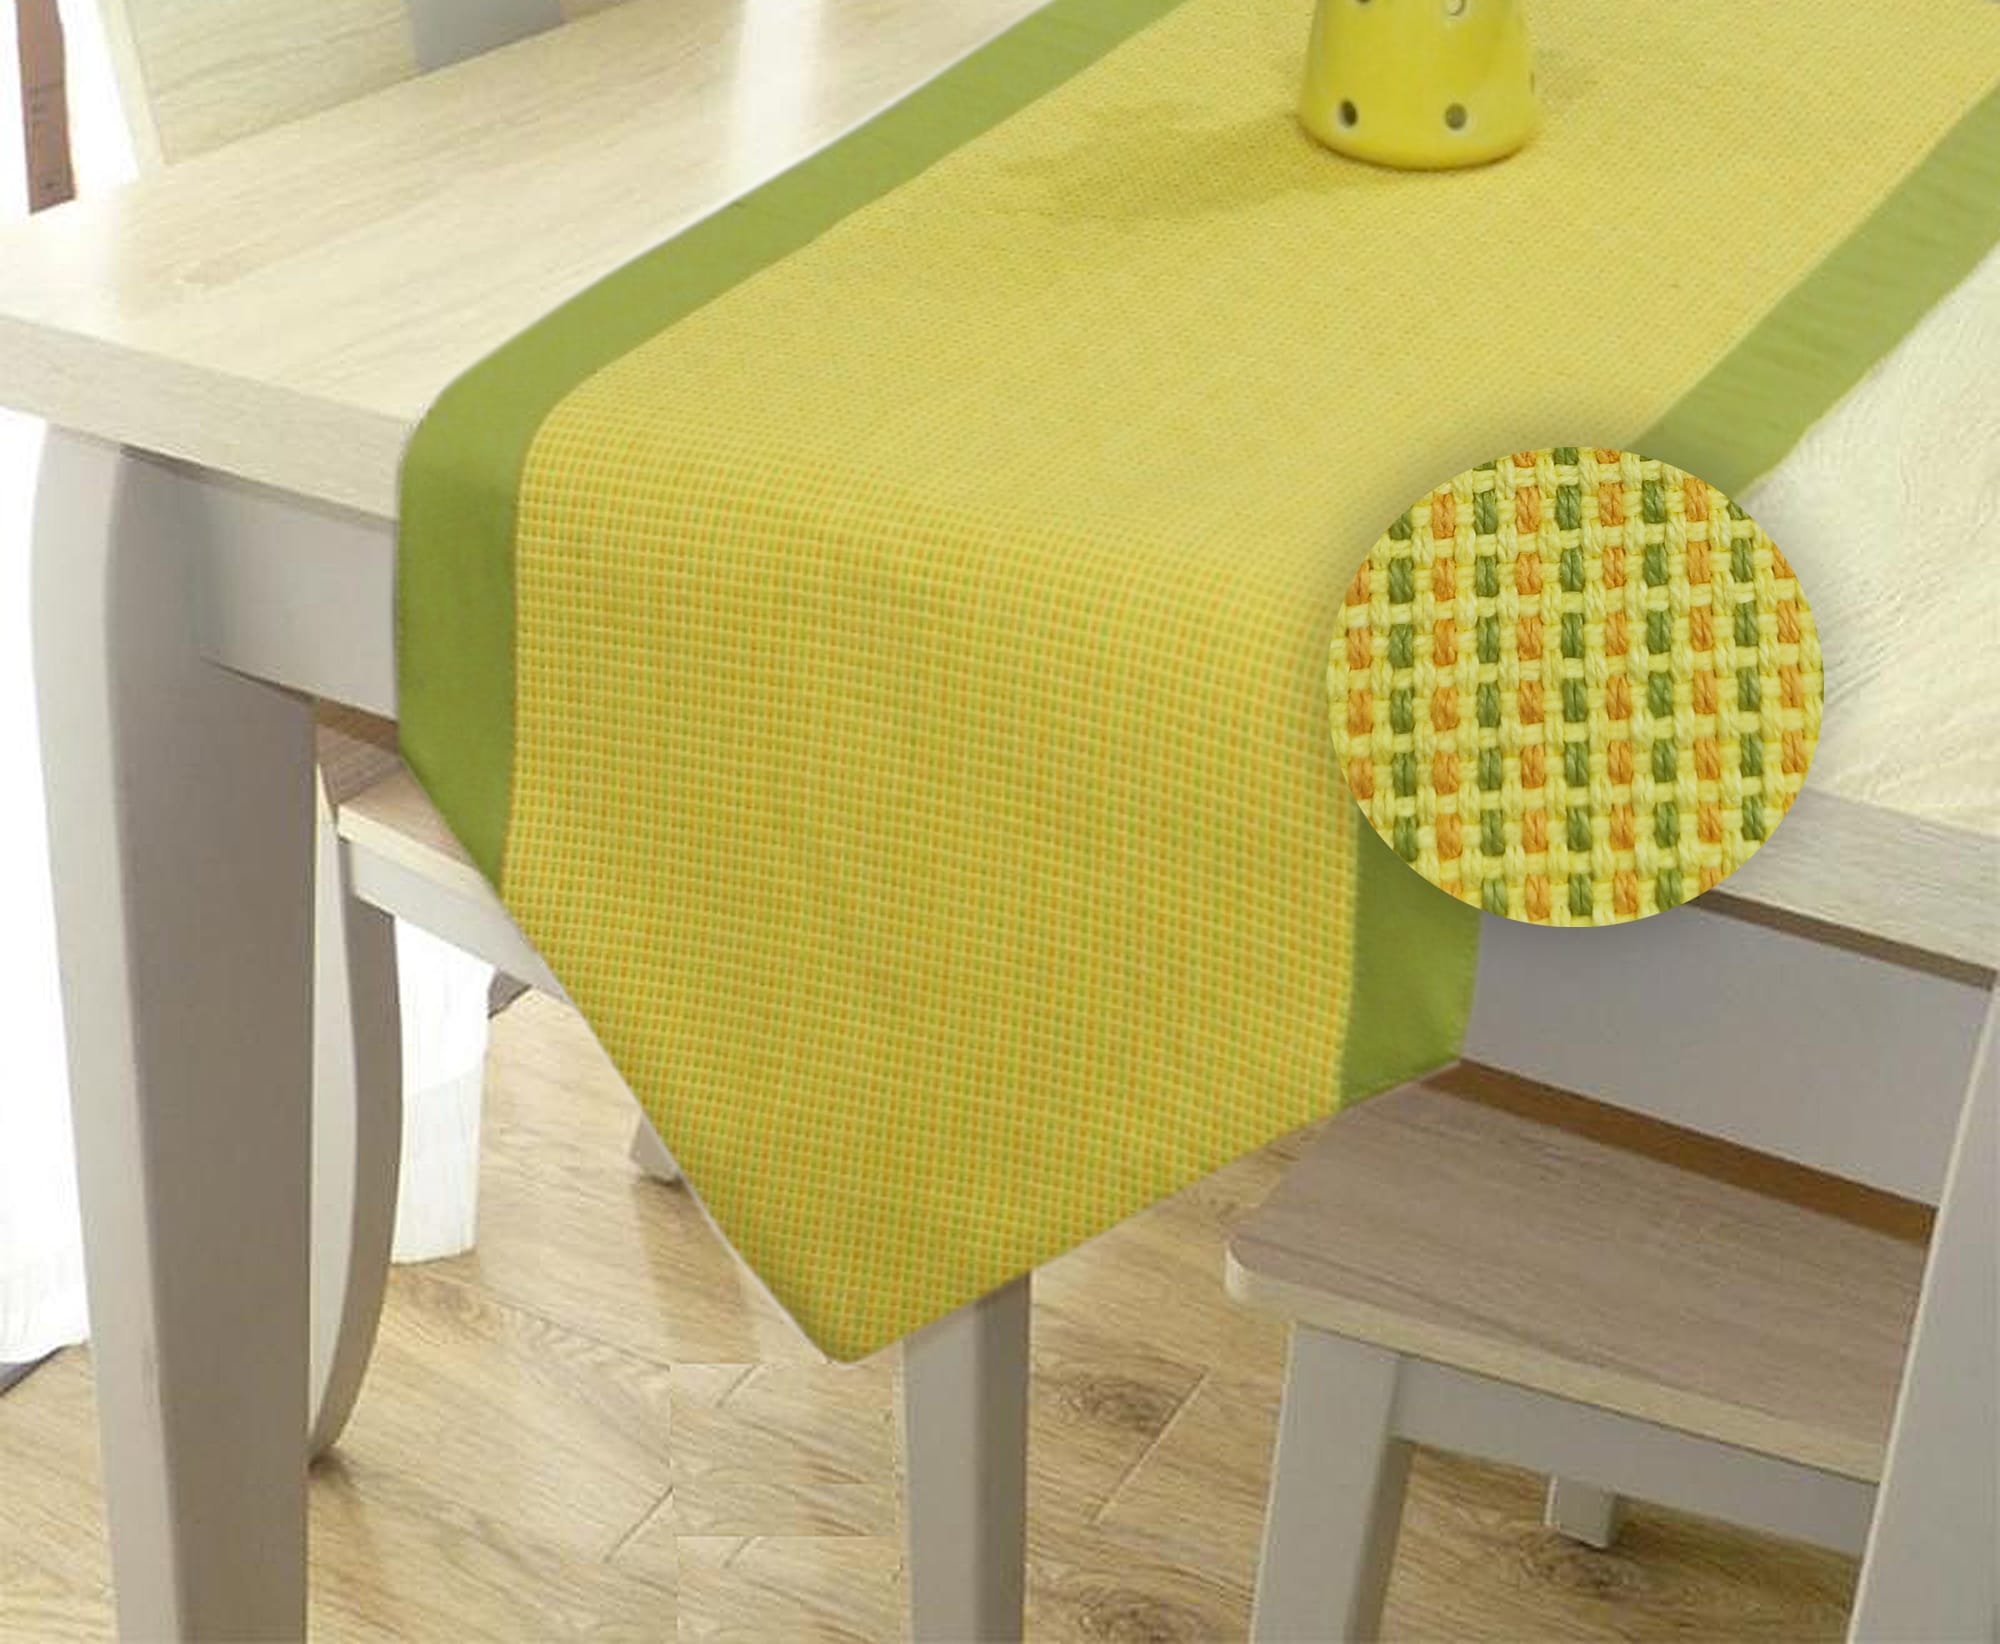 Handloom Yellow Woven Cotton Table Runner (6 Seater Table) online in India